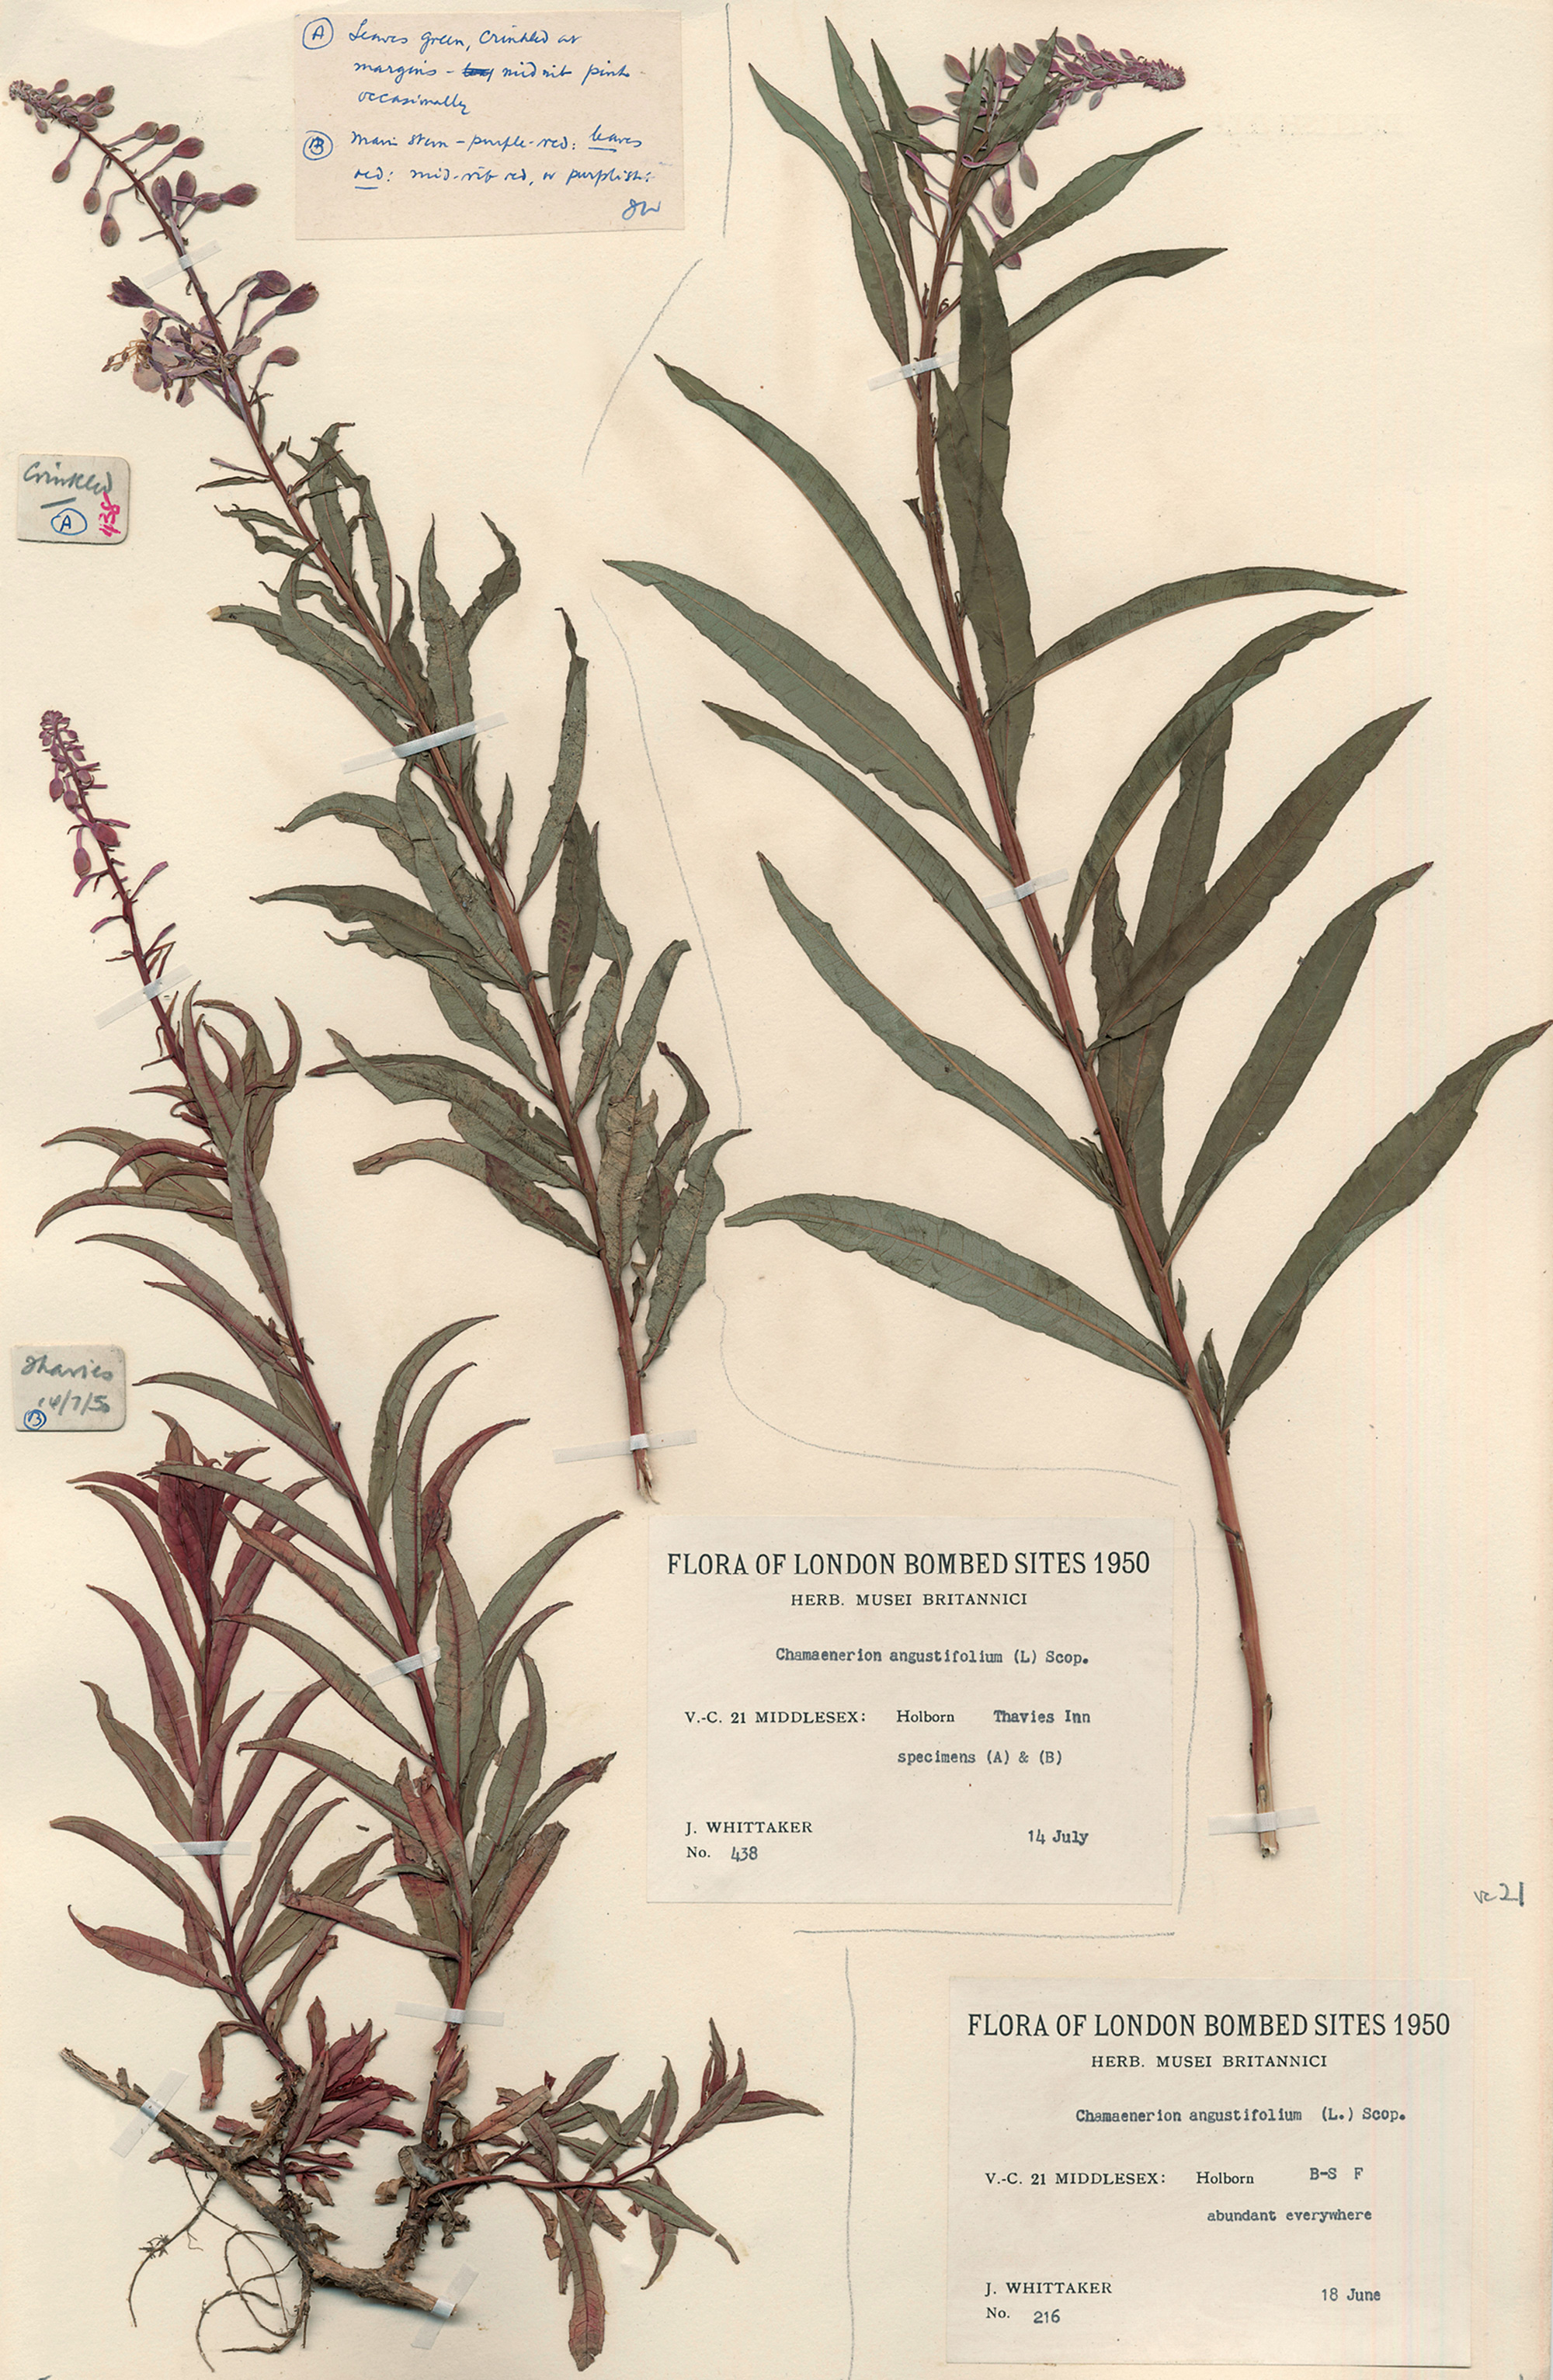 A pressed specimen of Chamerion angustifolium, also known as Epilobium angustifolium. This specimen of bombweed was collected during the London Natural History Society’s City Bombed Sites Survey in nineteen fifty. A member of the society that conducted the survey wrote of Cripplegate, the neighborhood in which it was collected: “This area in the very heart of London provides a splendid opportunity to members of the society for recording the colonisation and establishment of a new fauna and flora which, its is to be hoped, will not occur again.”